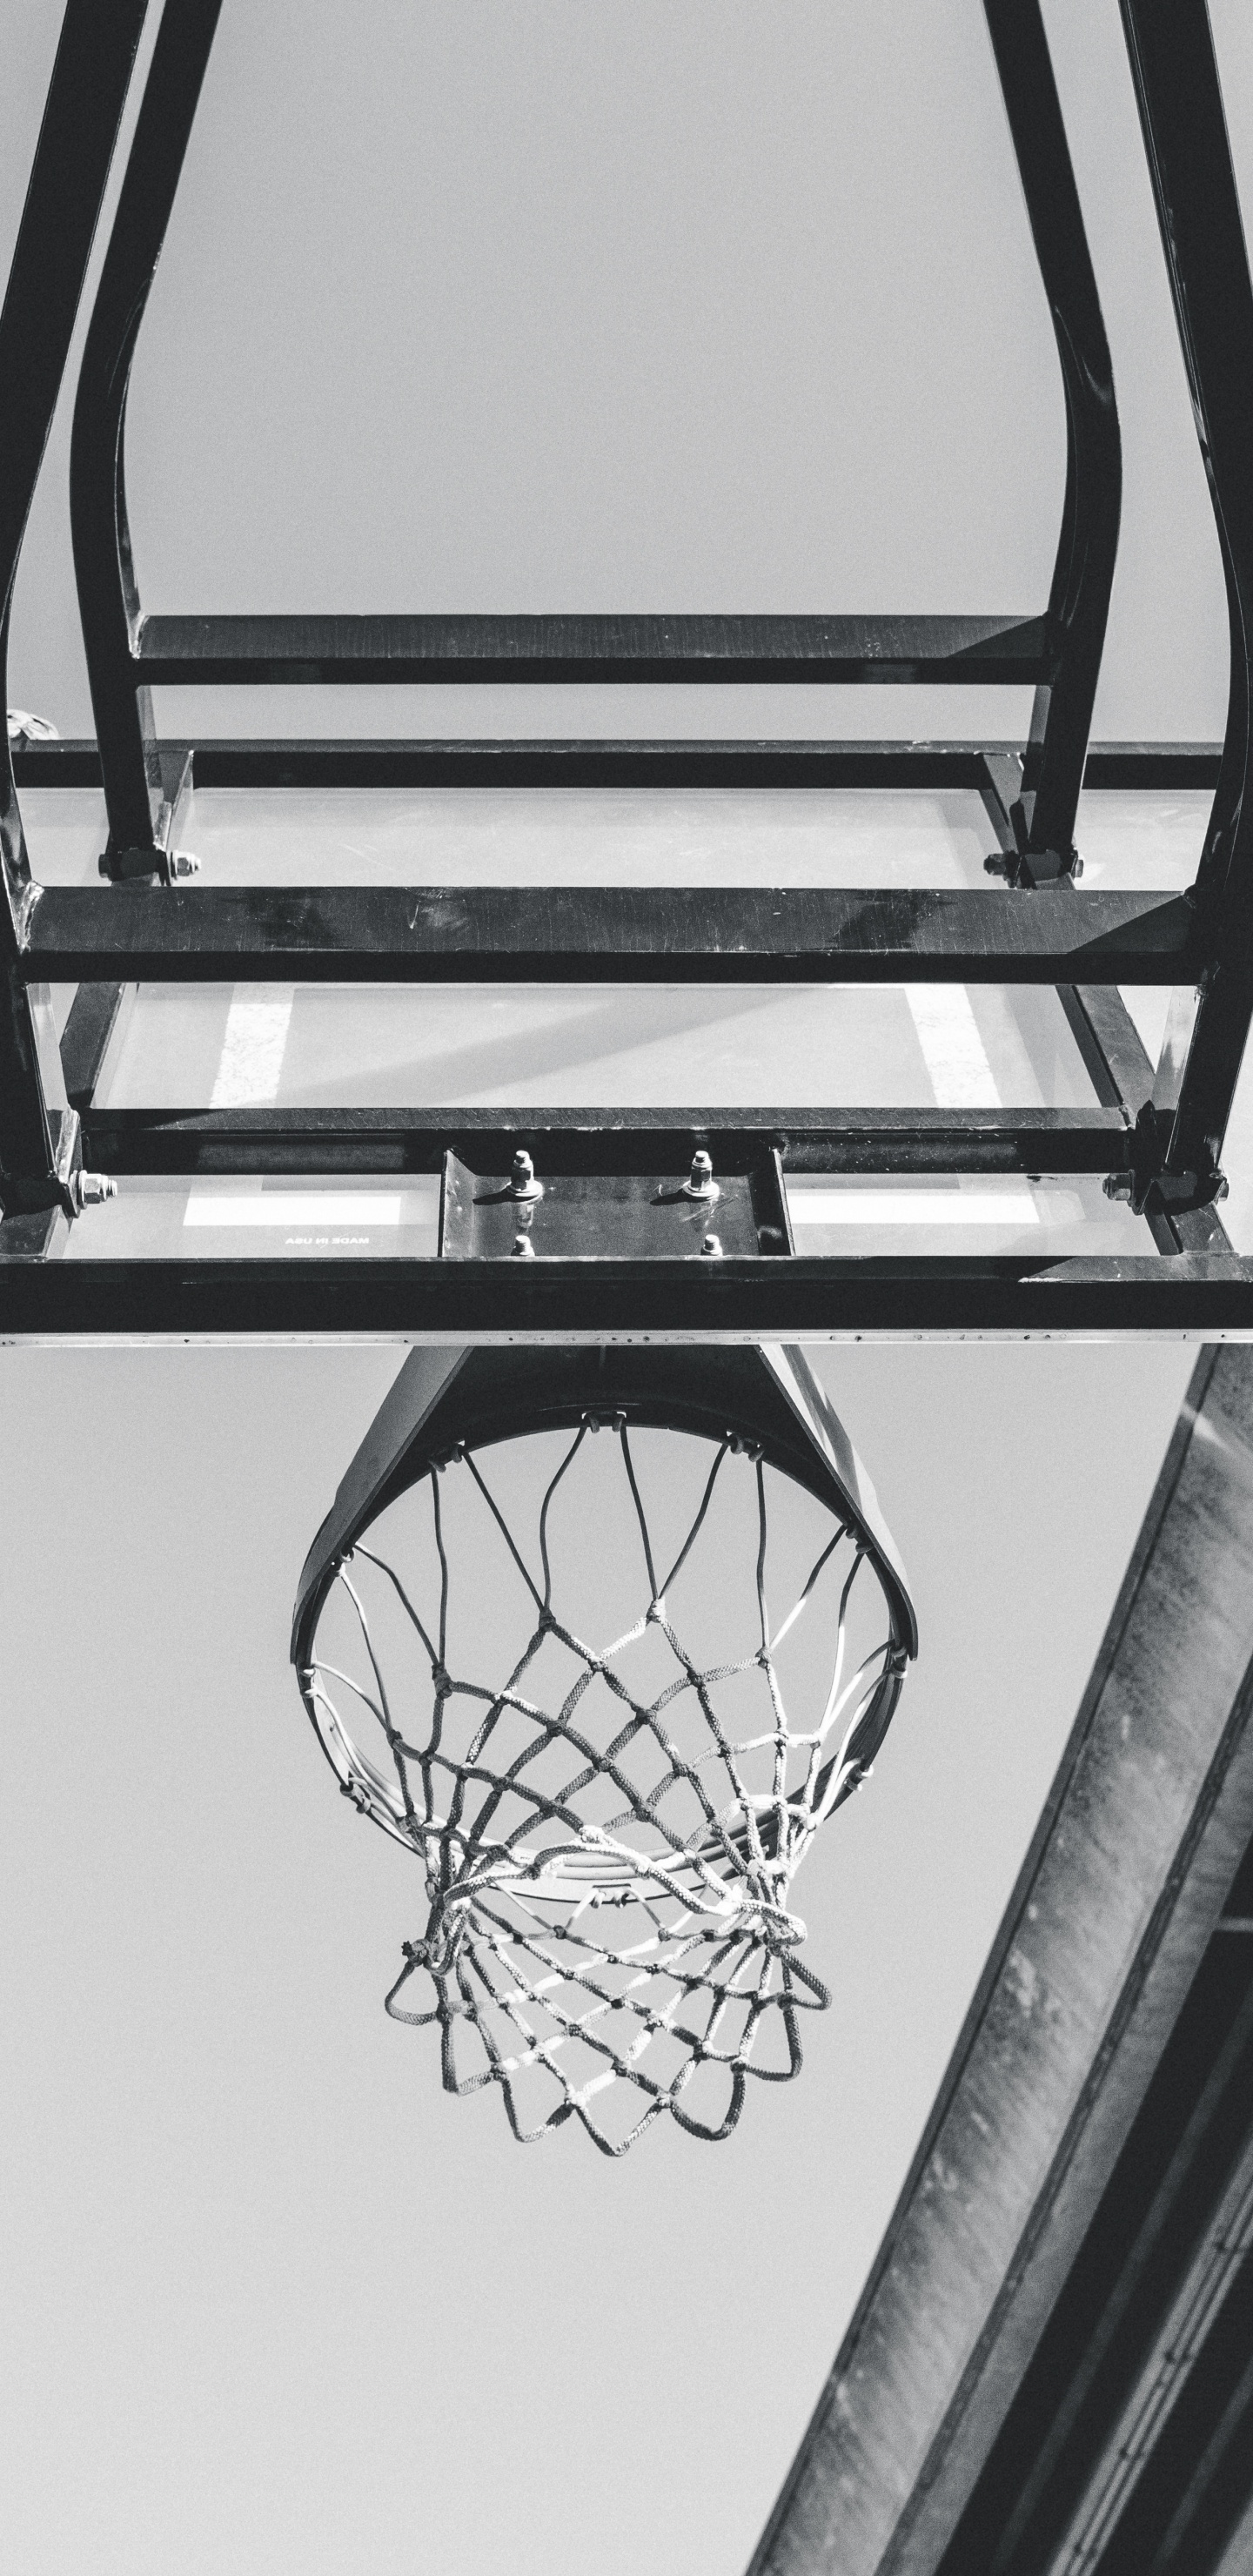 Black Basketball Hoop on White Wall. Wallpaper in 1440x2960 Resolution